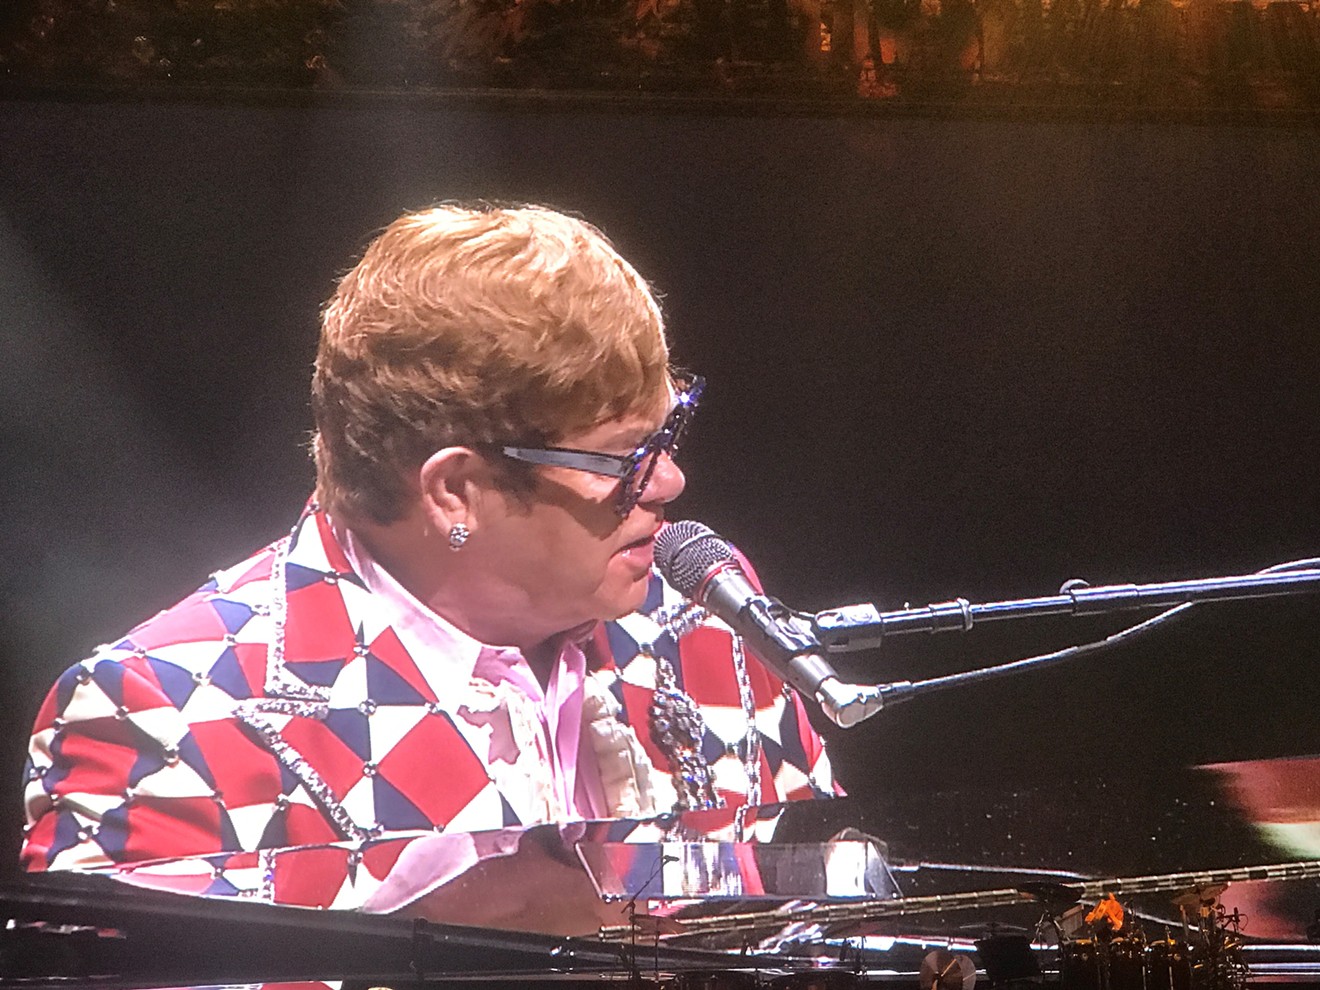 Elton John performed the first of two farewell concerts at the Pepsi Center on February 6, 2019.